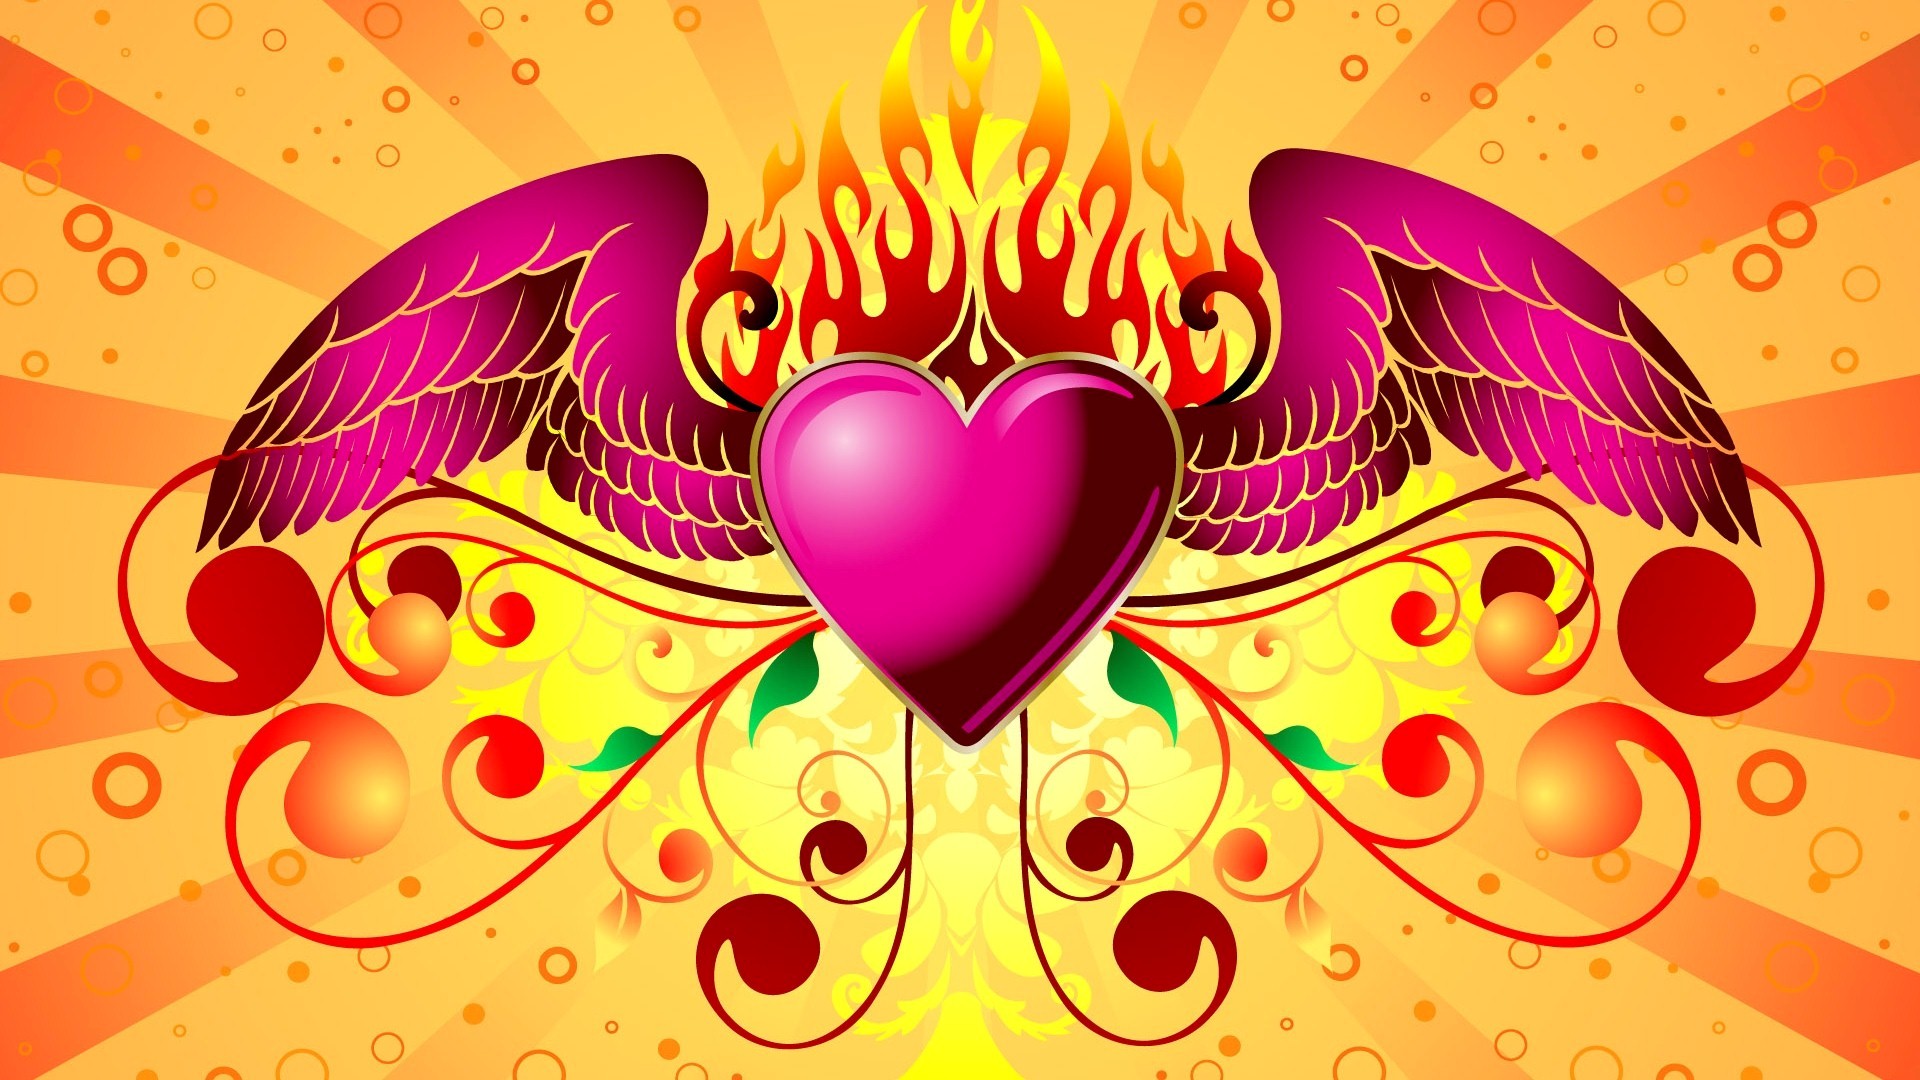 Pink Heart With Wings Fire Design HD Image Wallpaper